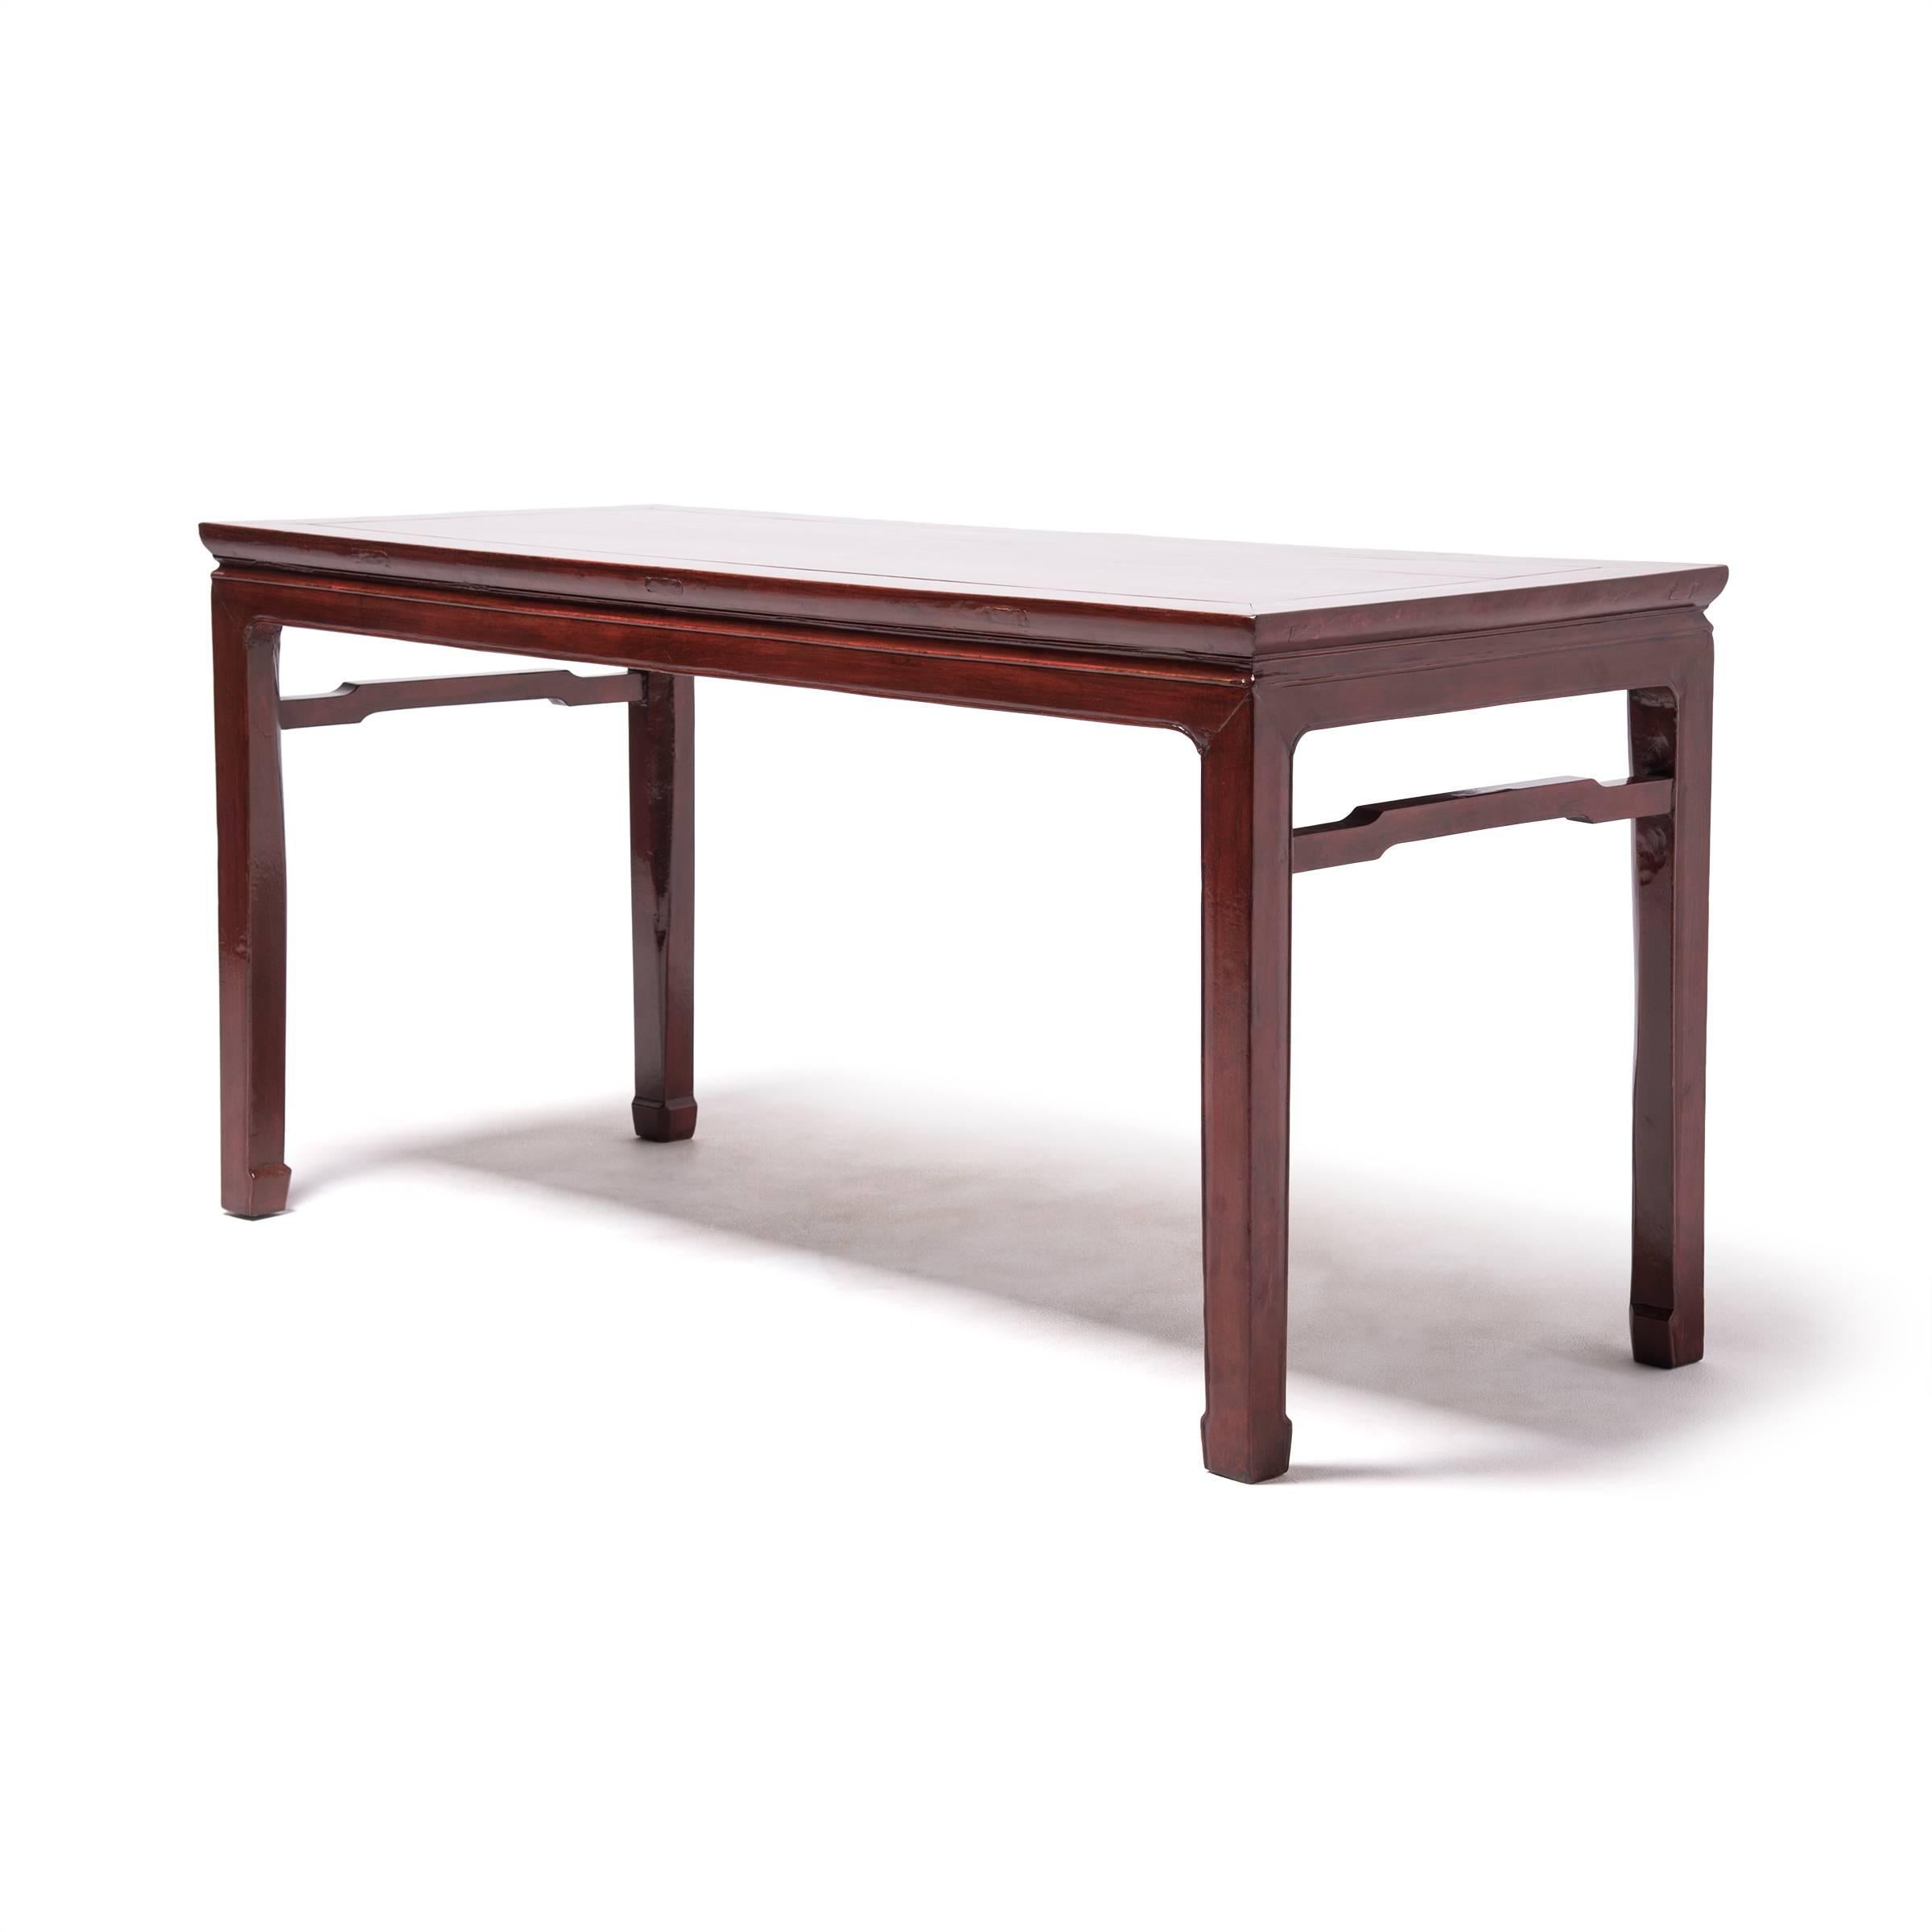 This elegant elmwood painting table was crafted over a century ago by artisans in northern China. The broad tabletop provided an ideal surface for unfurling a scroll to compose poetry or calligraphy paintings. The table is beautifully proportioned